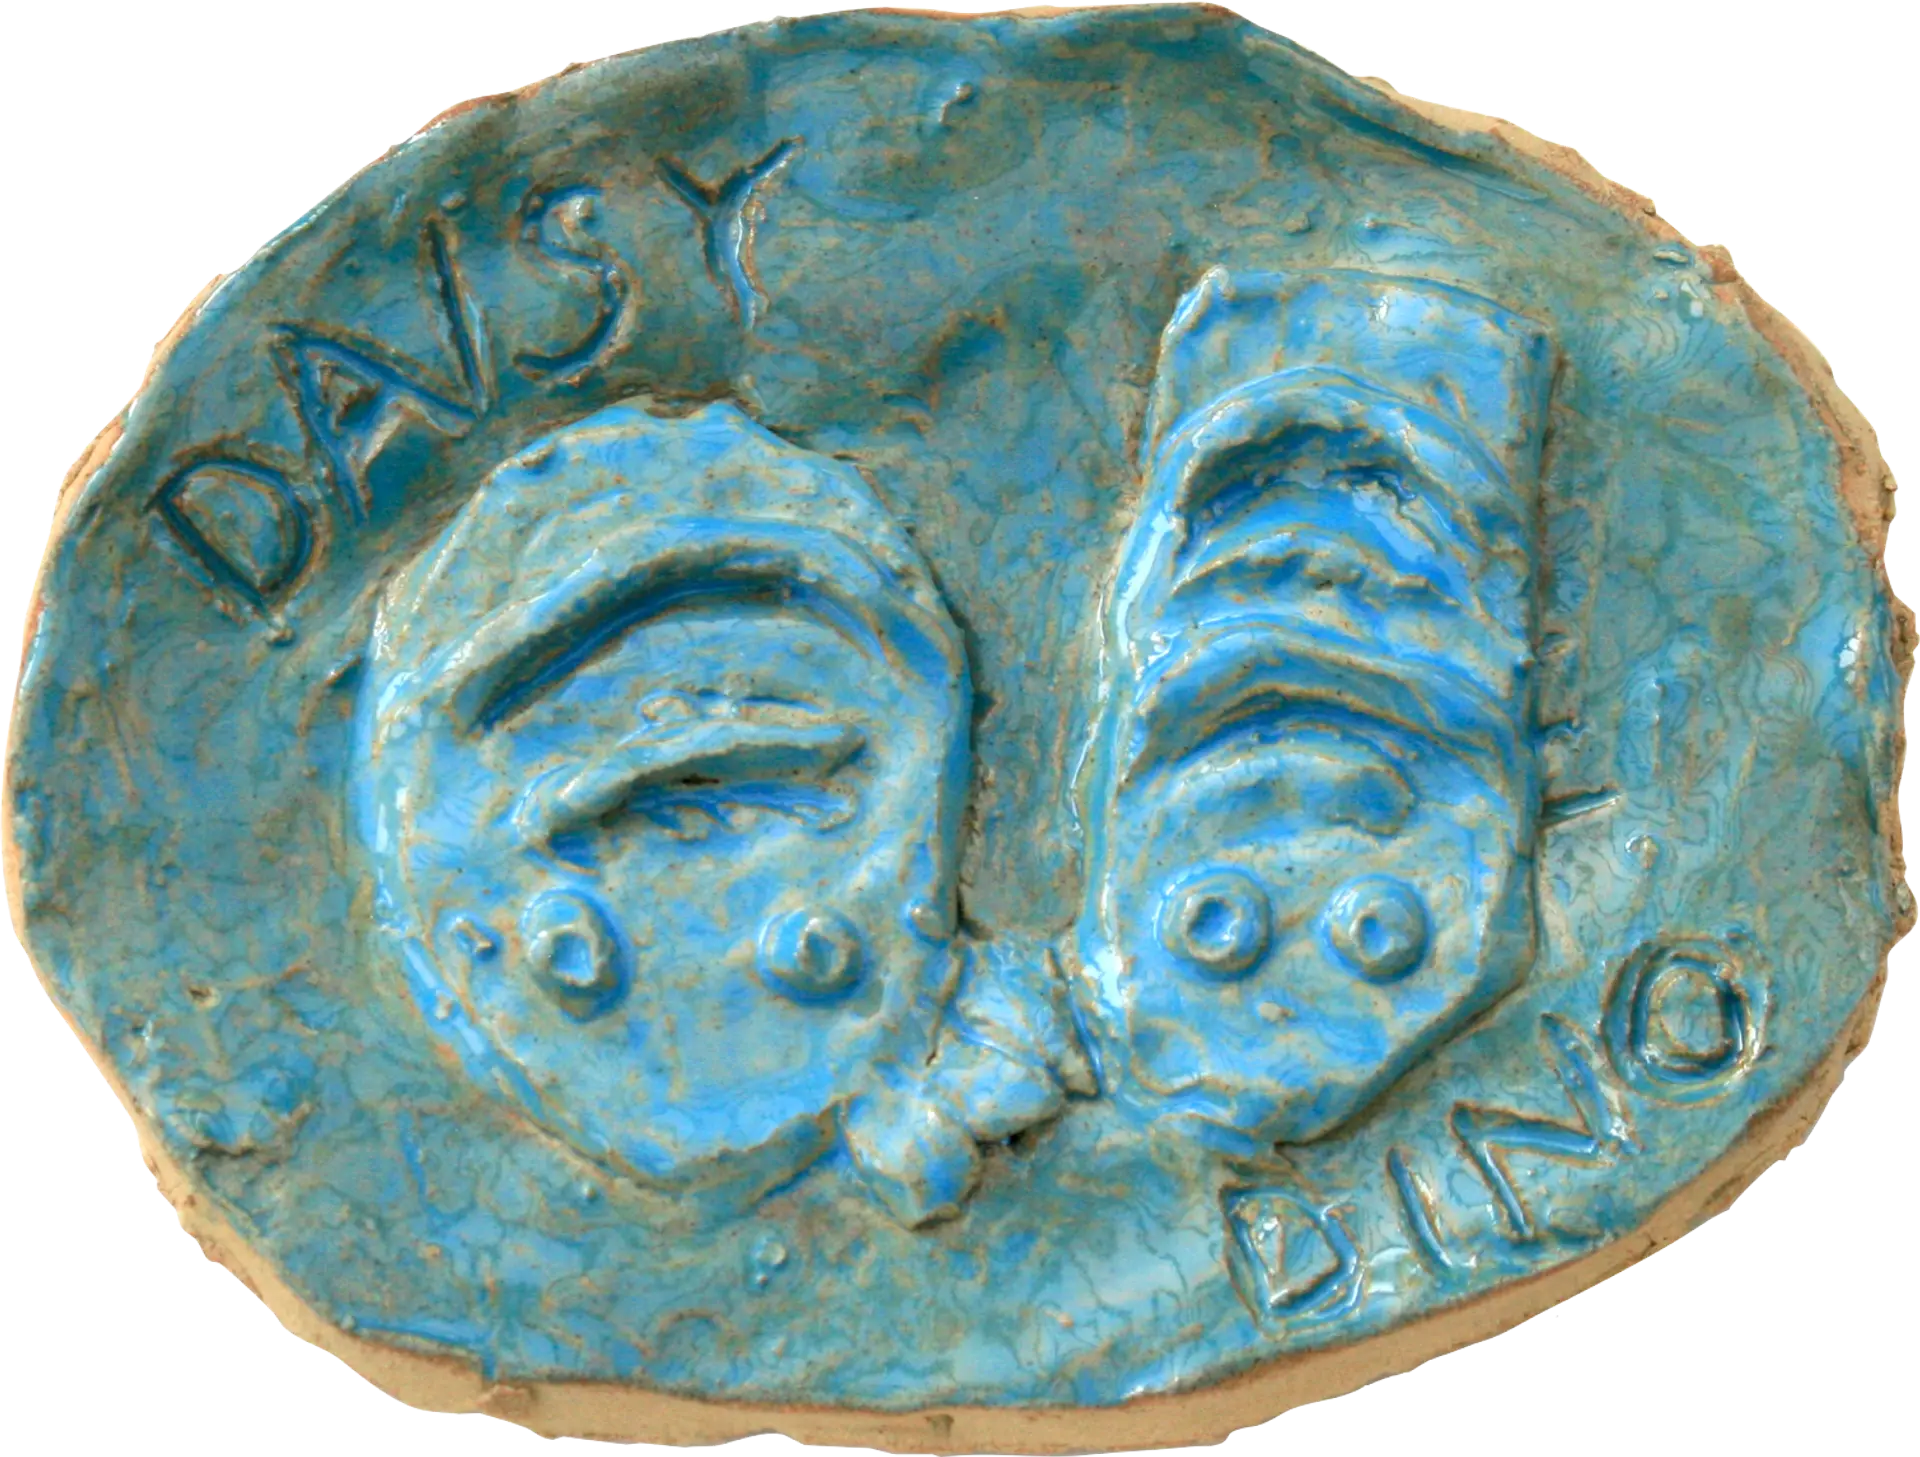 An oval shaped blue glazed ceramic tile of Lewis’s two guinea pigs, Daisy and Dino. Their names are written around the edge of the tile. They are sitting close together and have stripes along their bodies. 